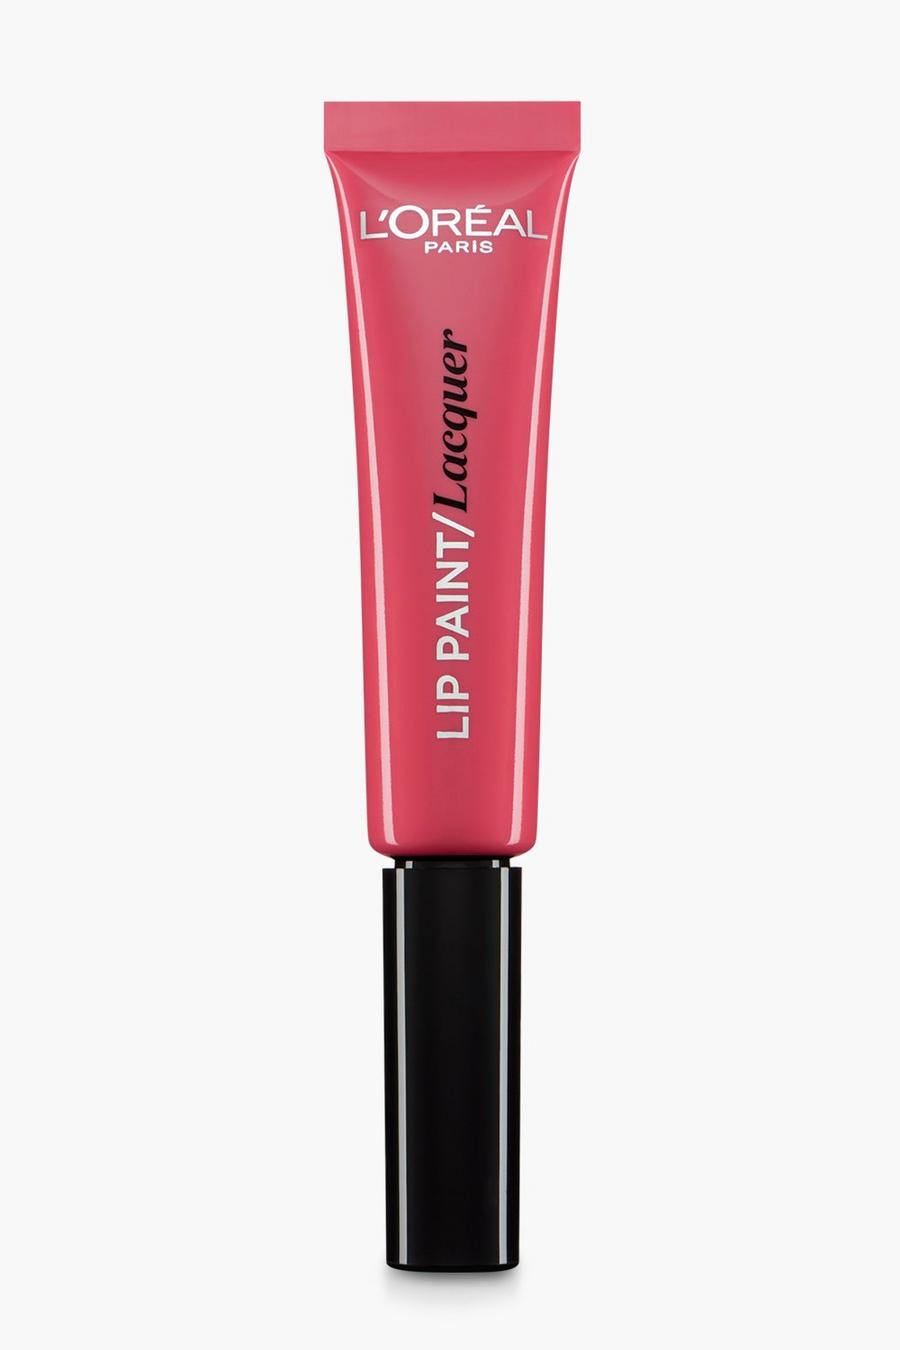 L’Oreal Infall Lippen Lack - Darling Pink 102 image number 1